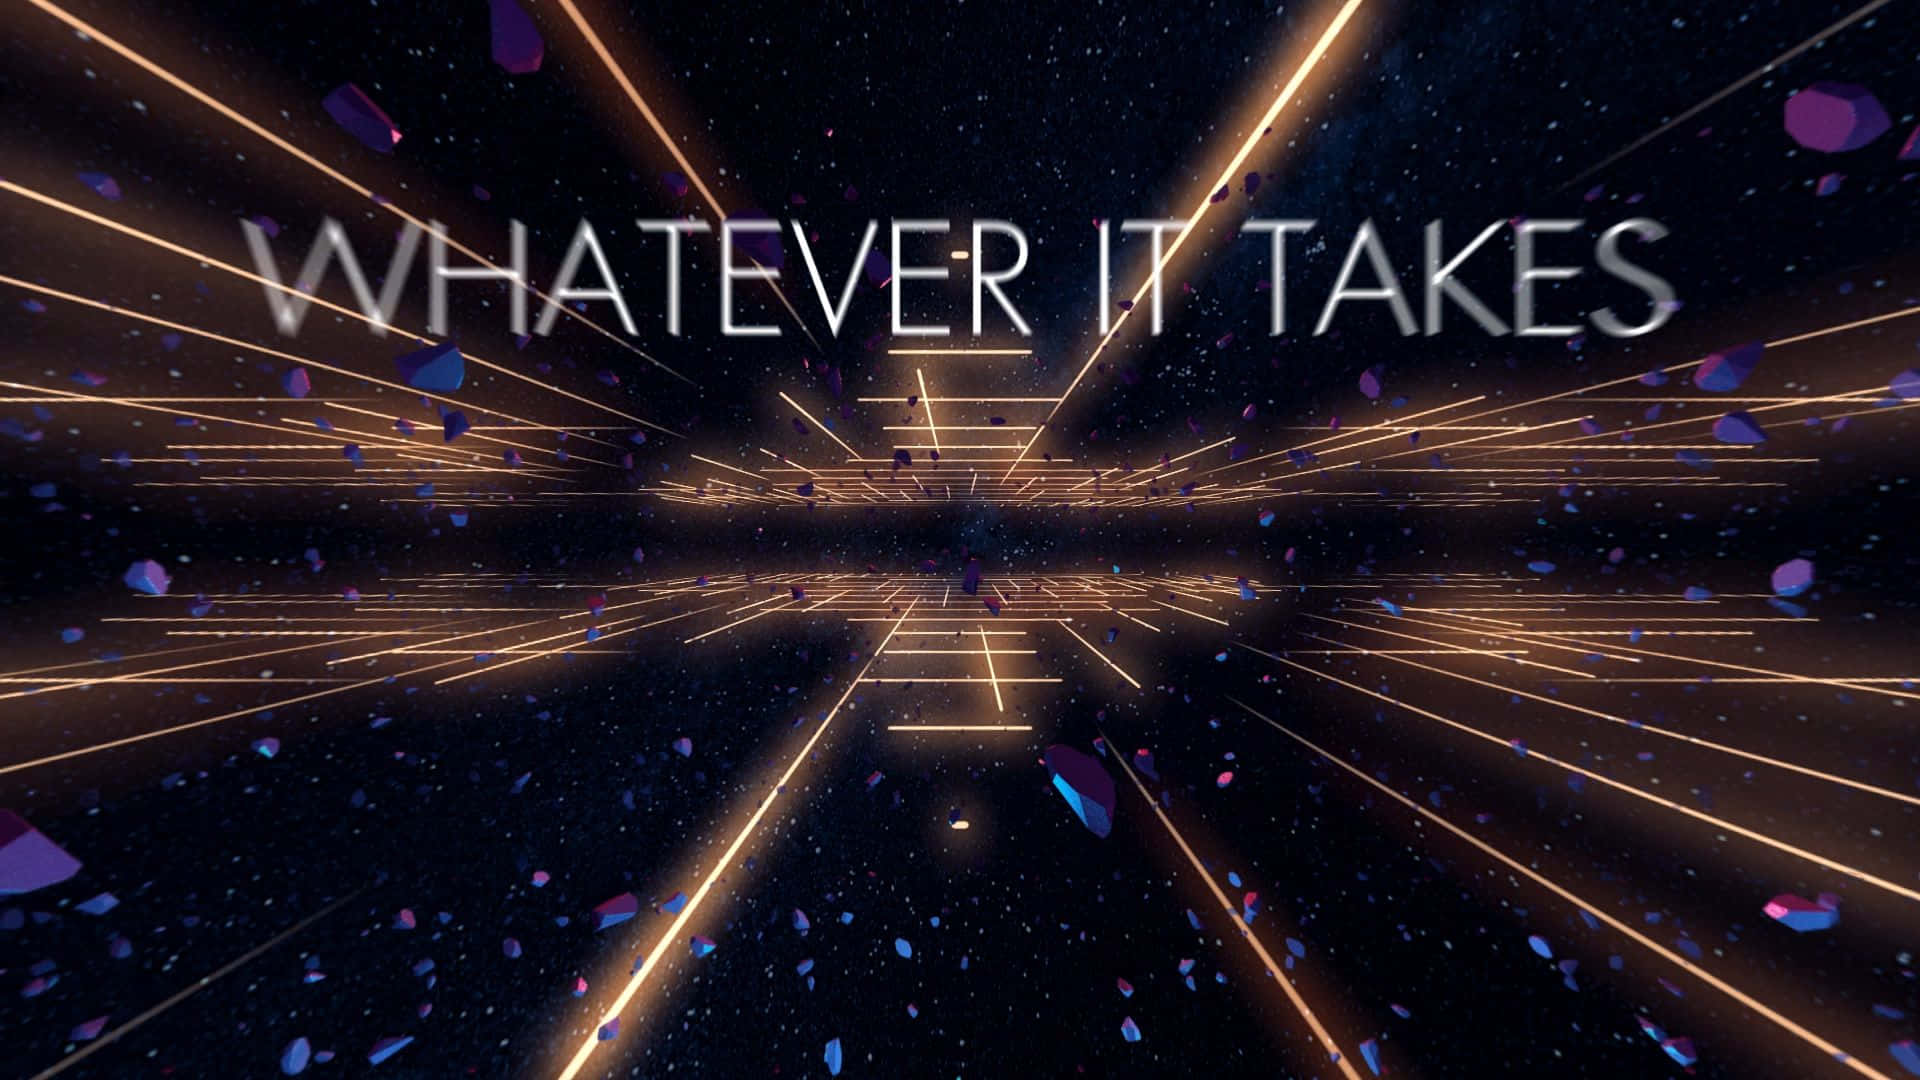 Whatever It Takes - A Space With A Neon Light